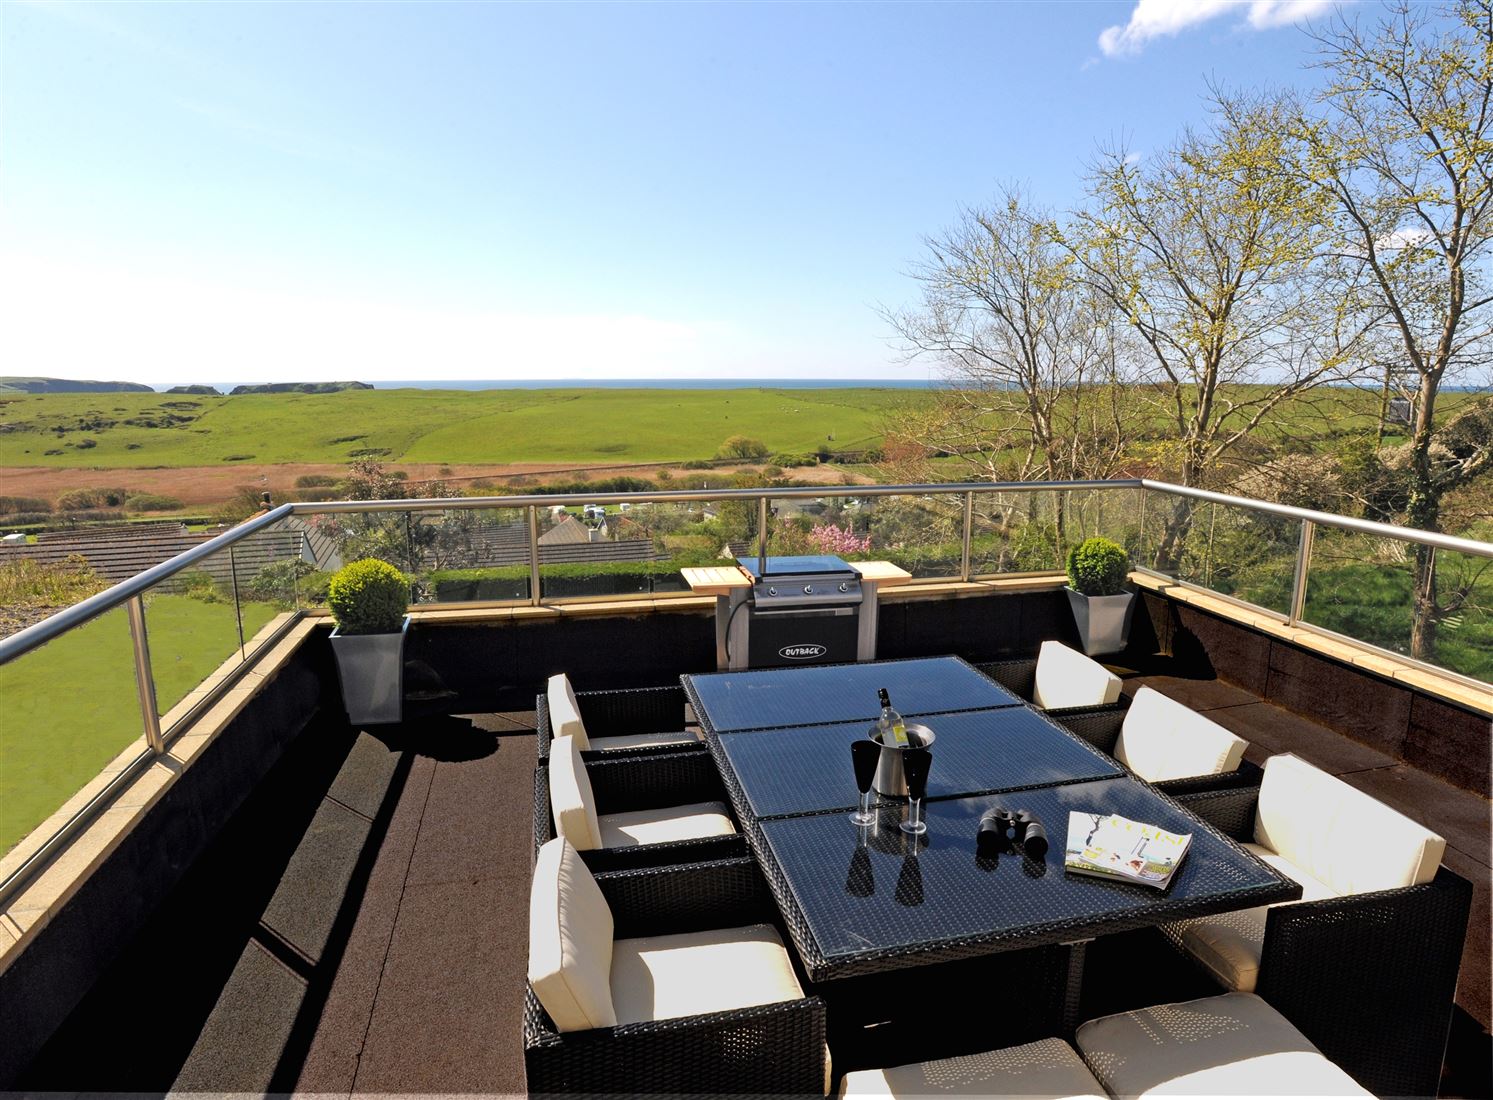 Table and chairs set-up on a Royal Chrome Orbit Glass Balustrade Balcony with stunning countryside views